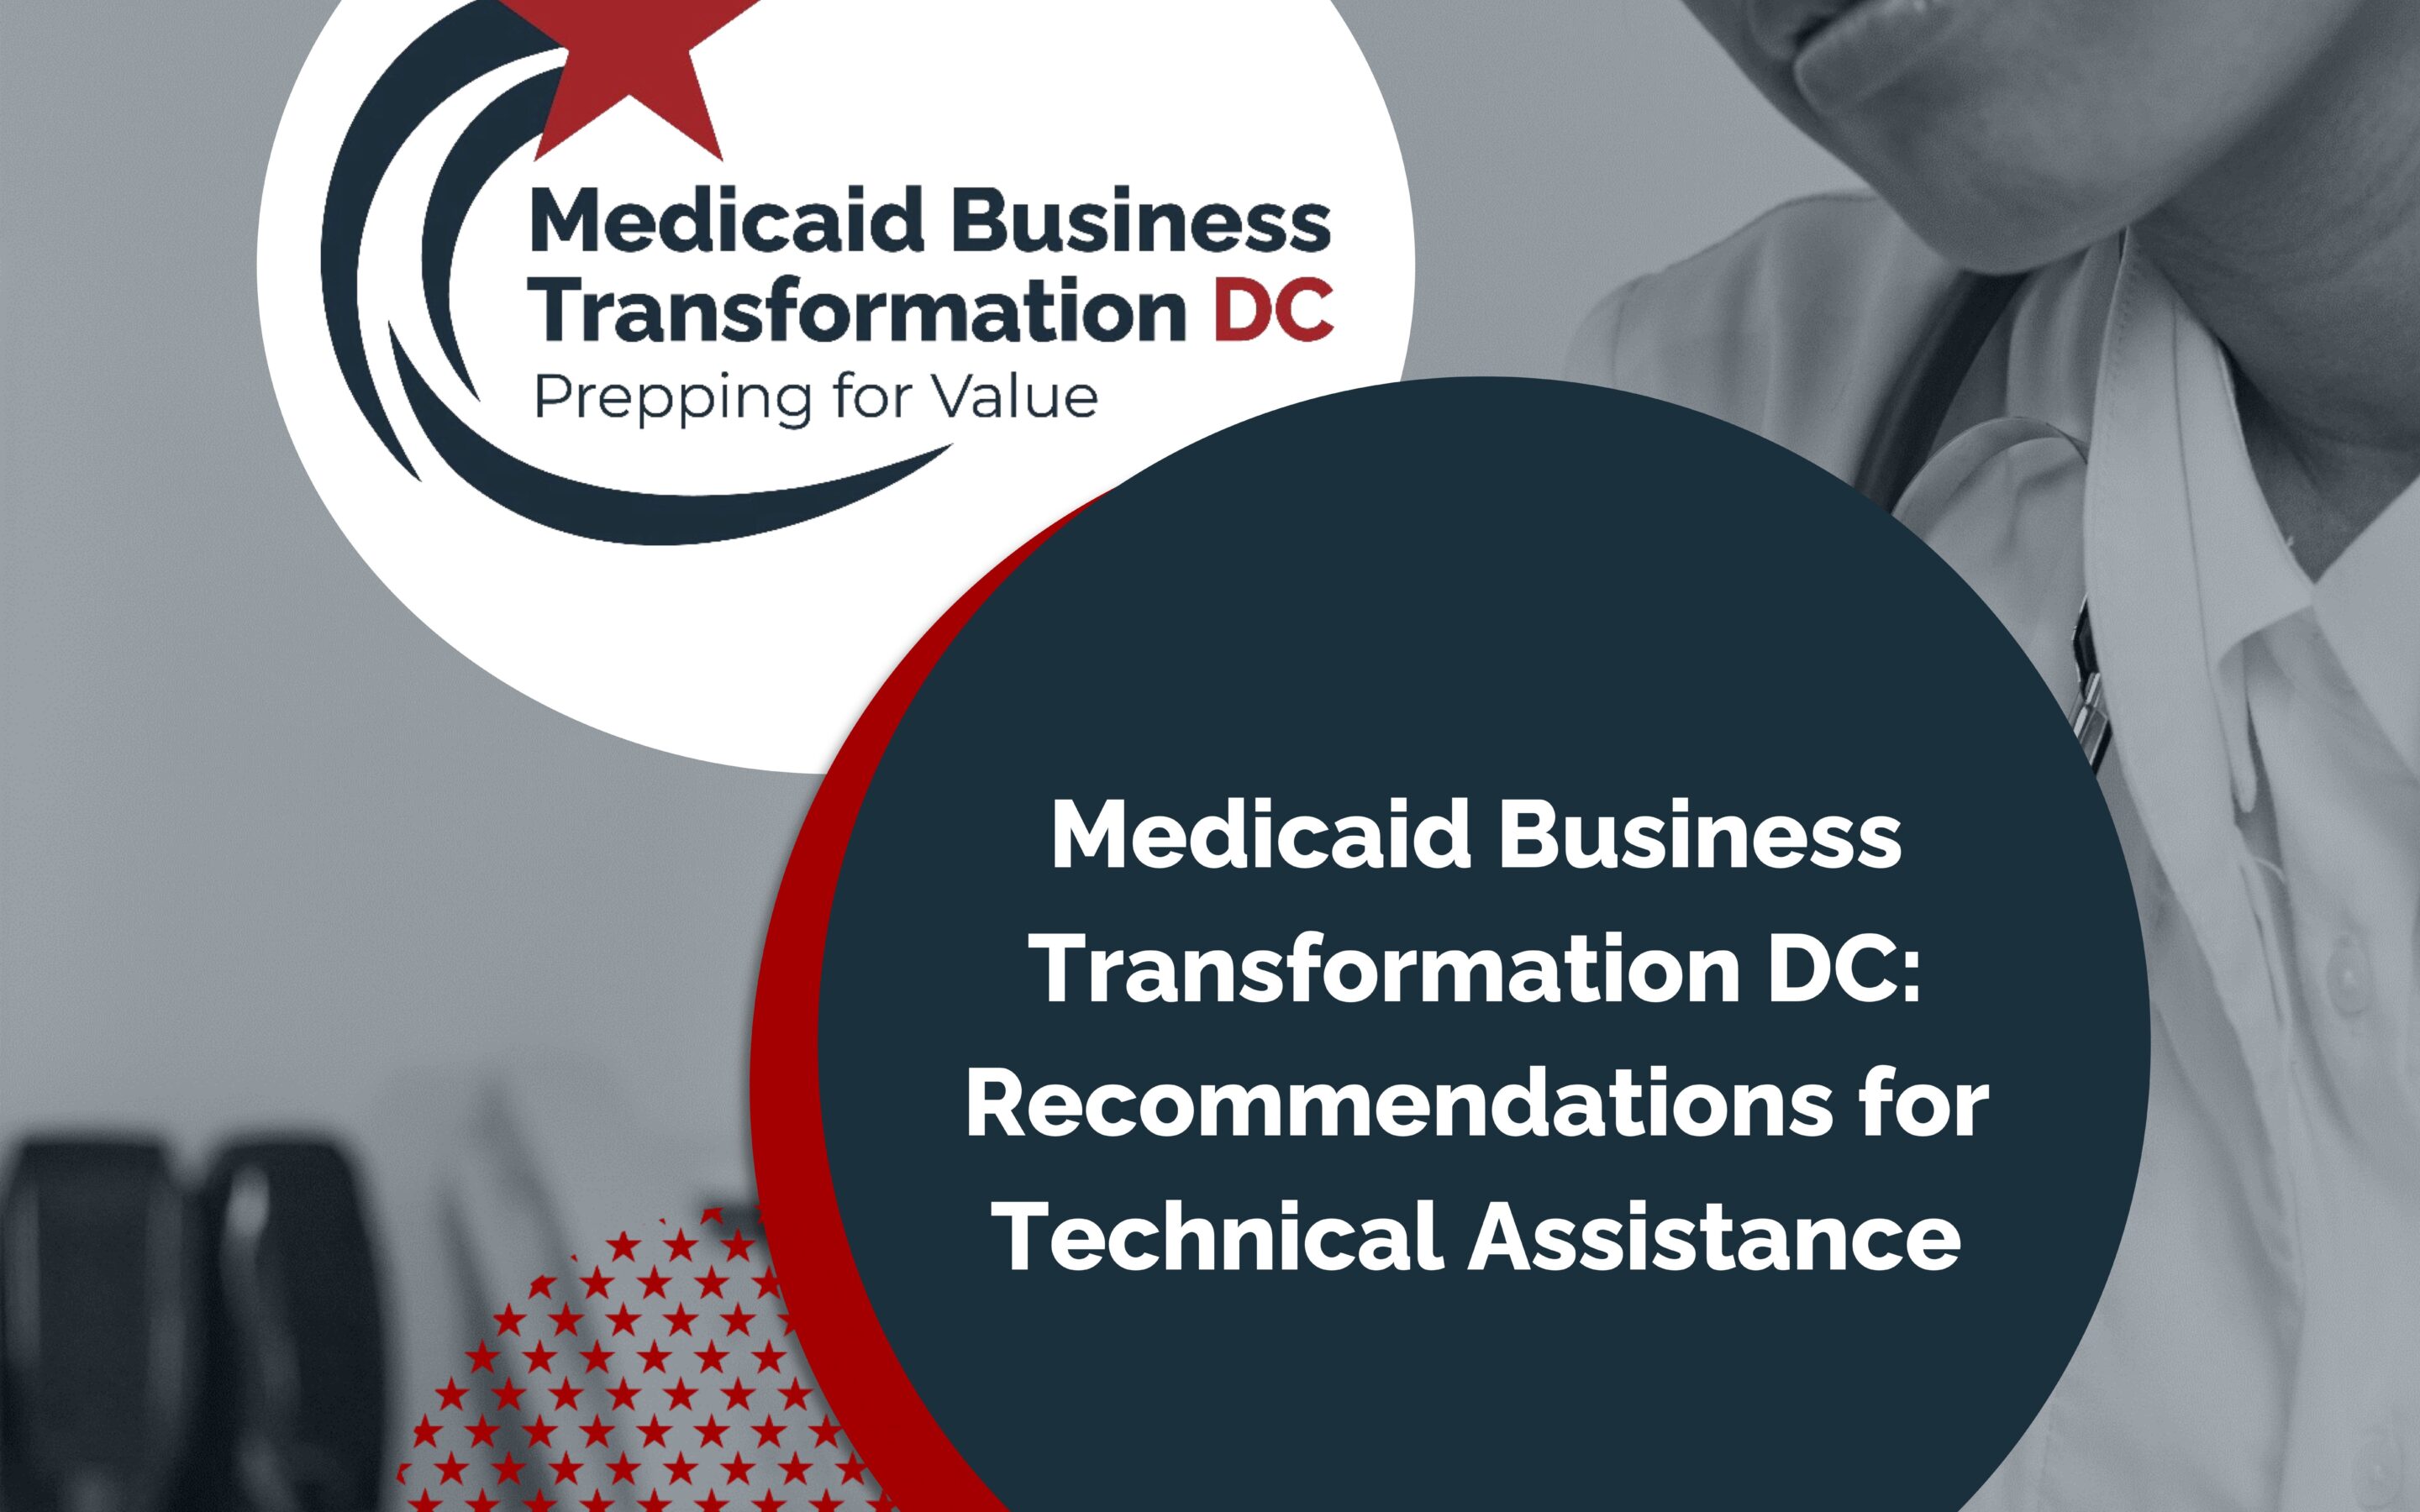 Medicaid Business Transformation DC Report Shares Insights and Recommendations on Providers’ Technical Assistance Needs